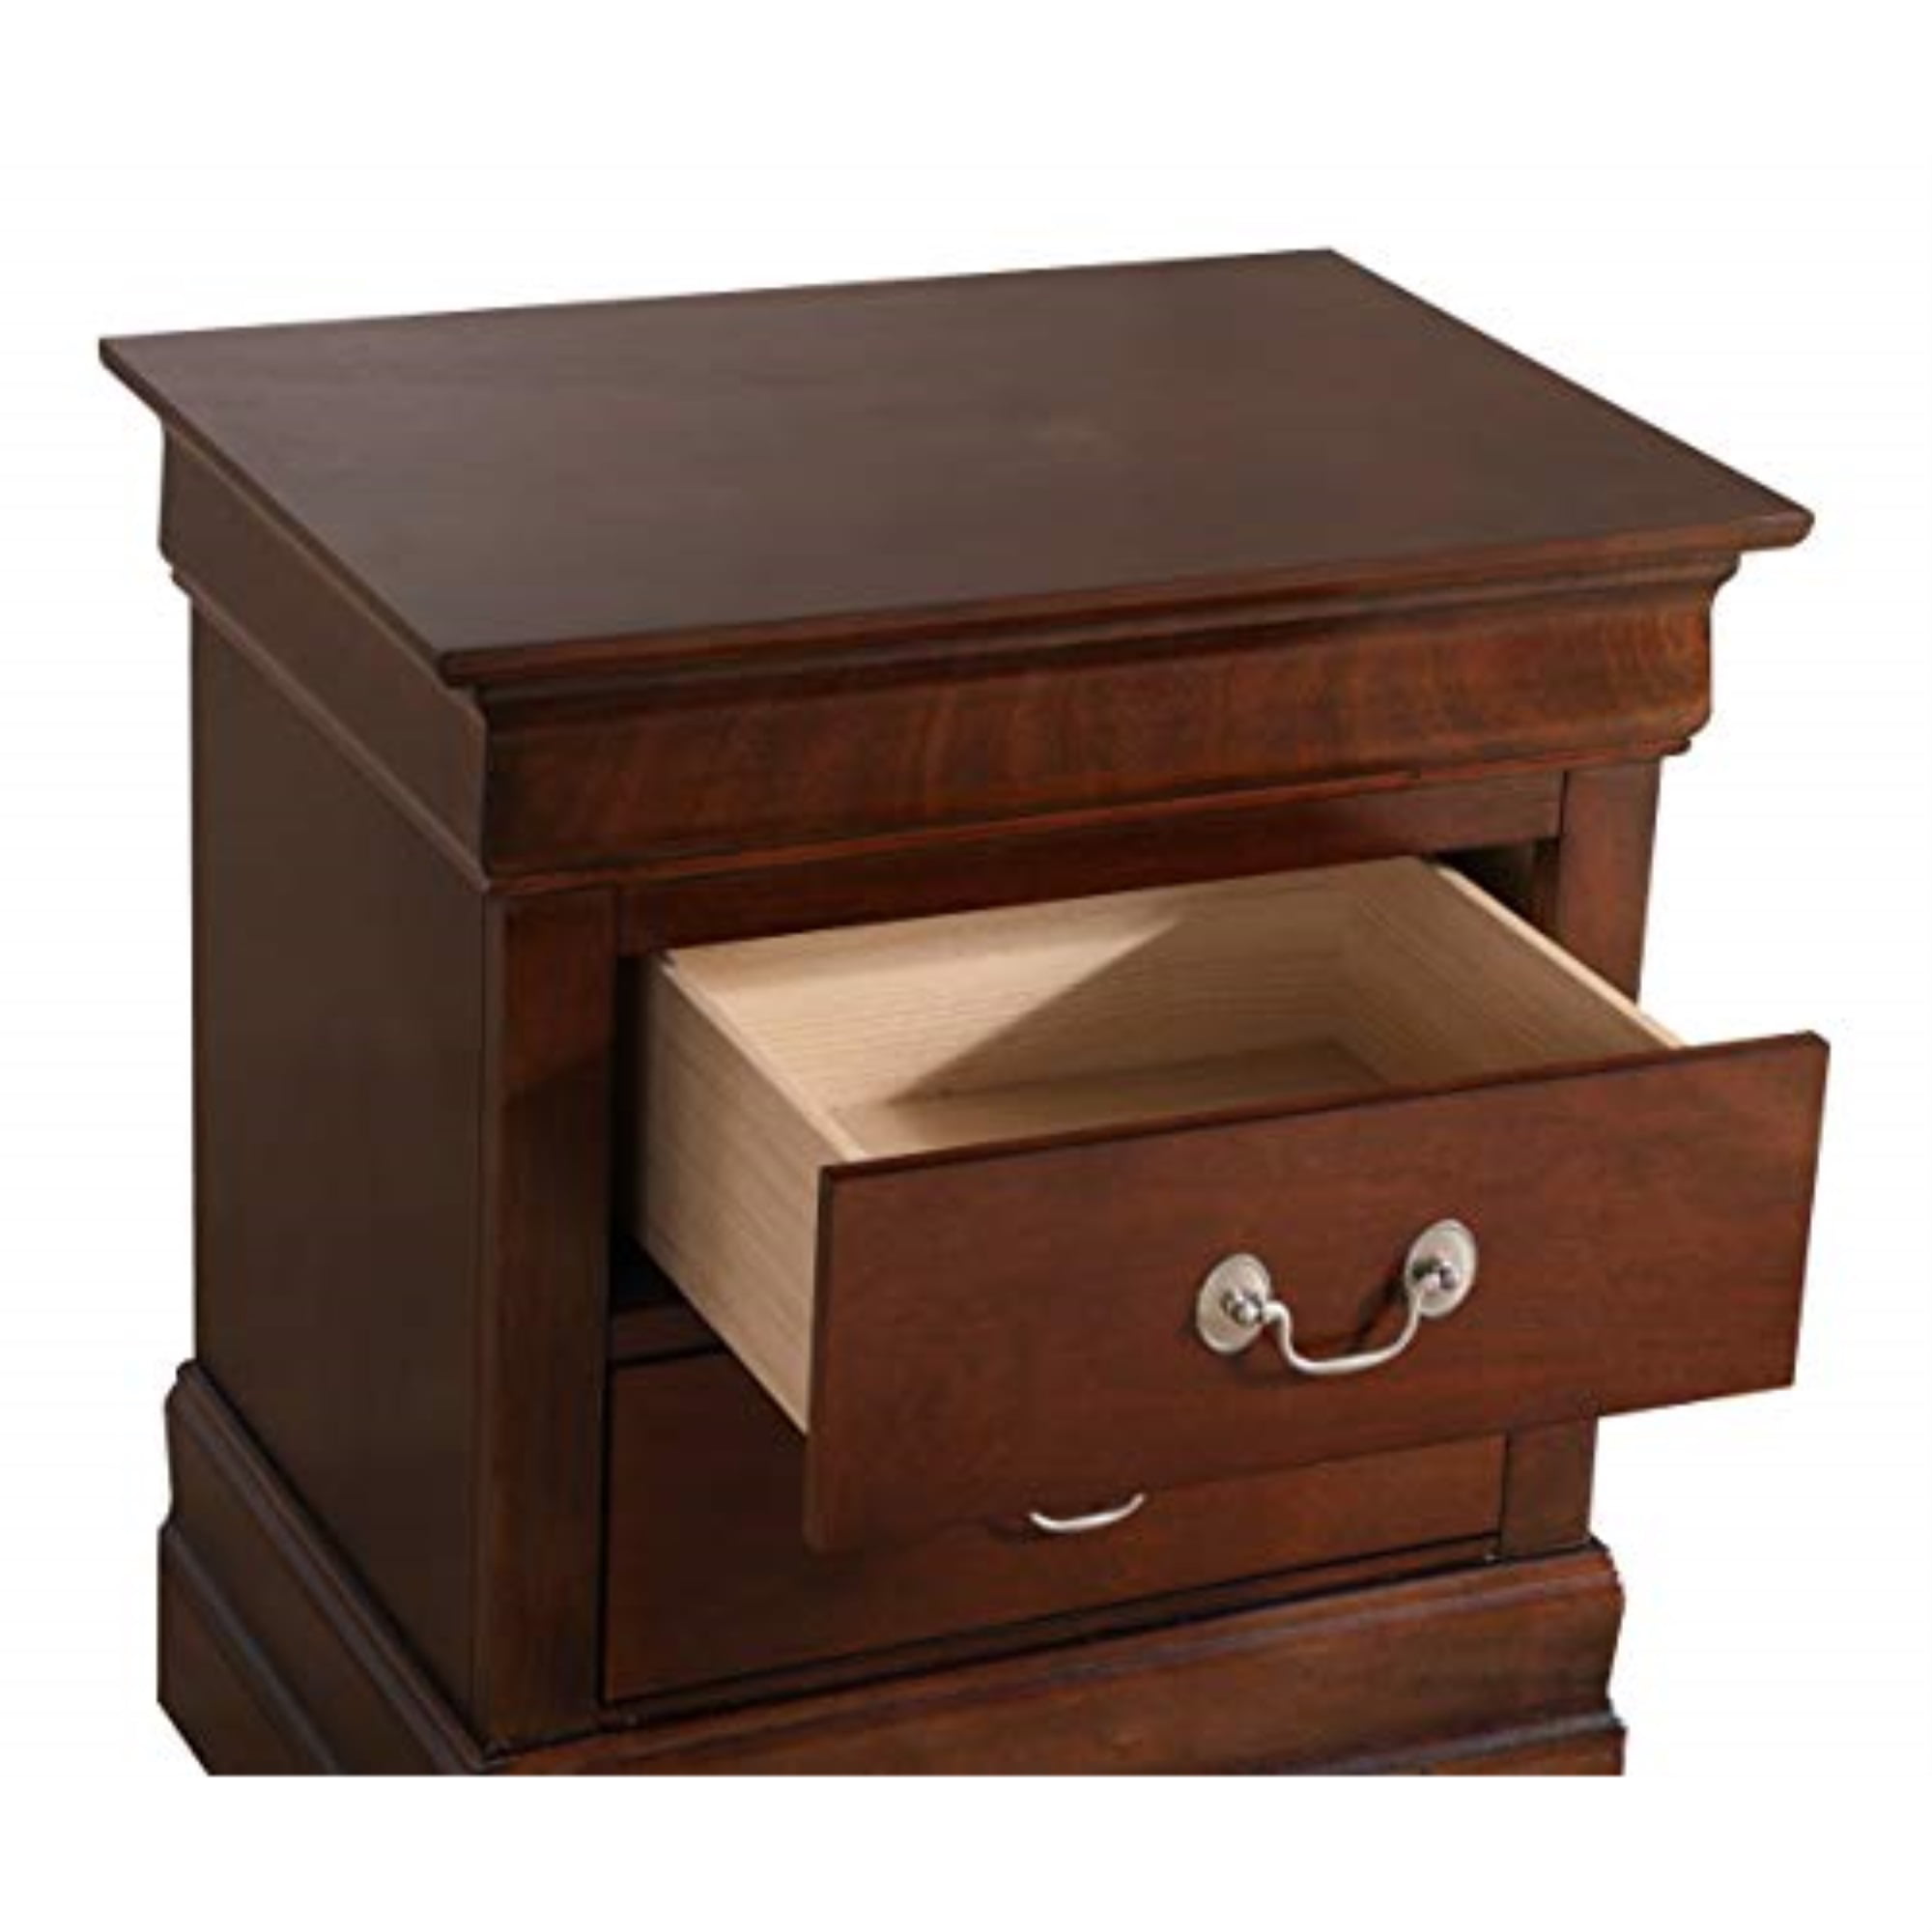 Glory+Furniture+Louis+Phillipe+G3190-N+Nightstand+White for sale online